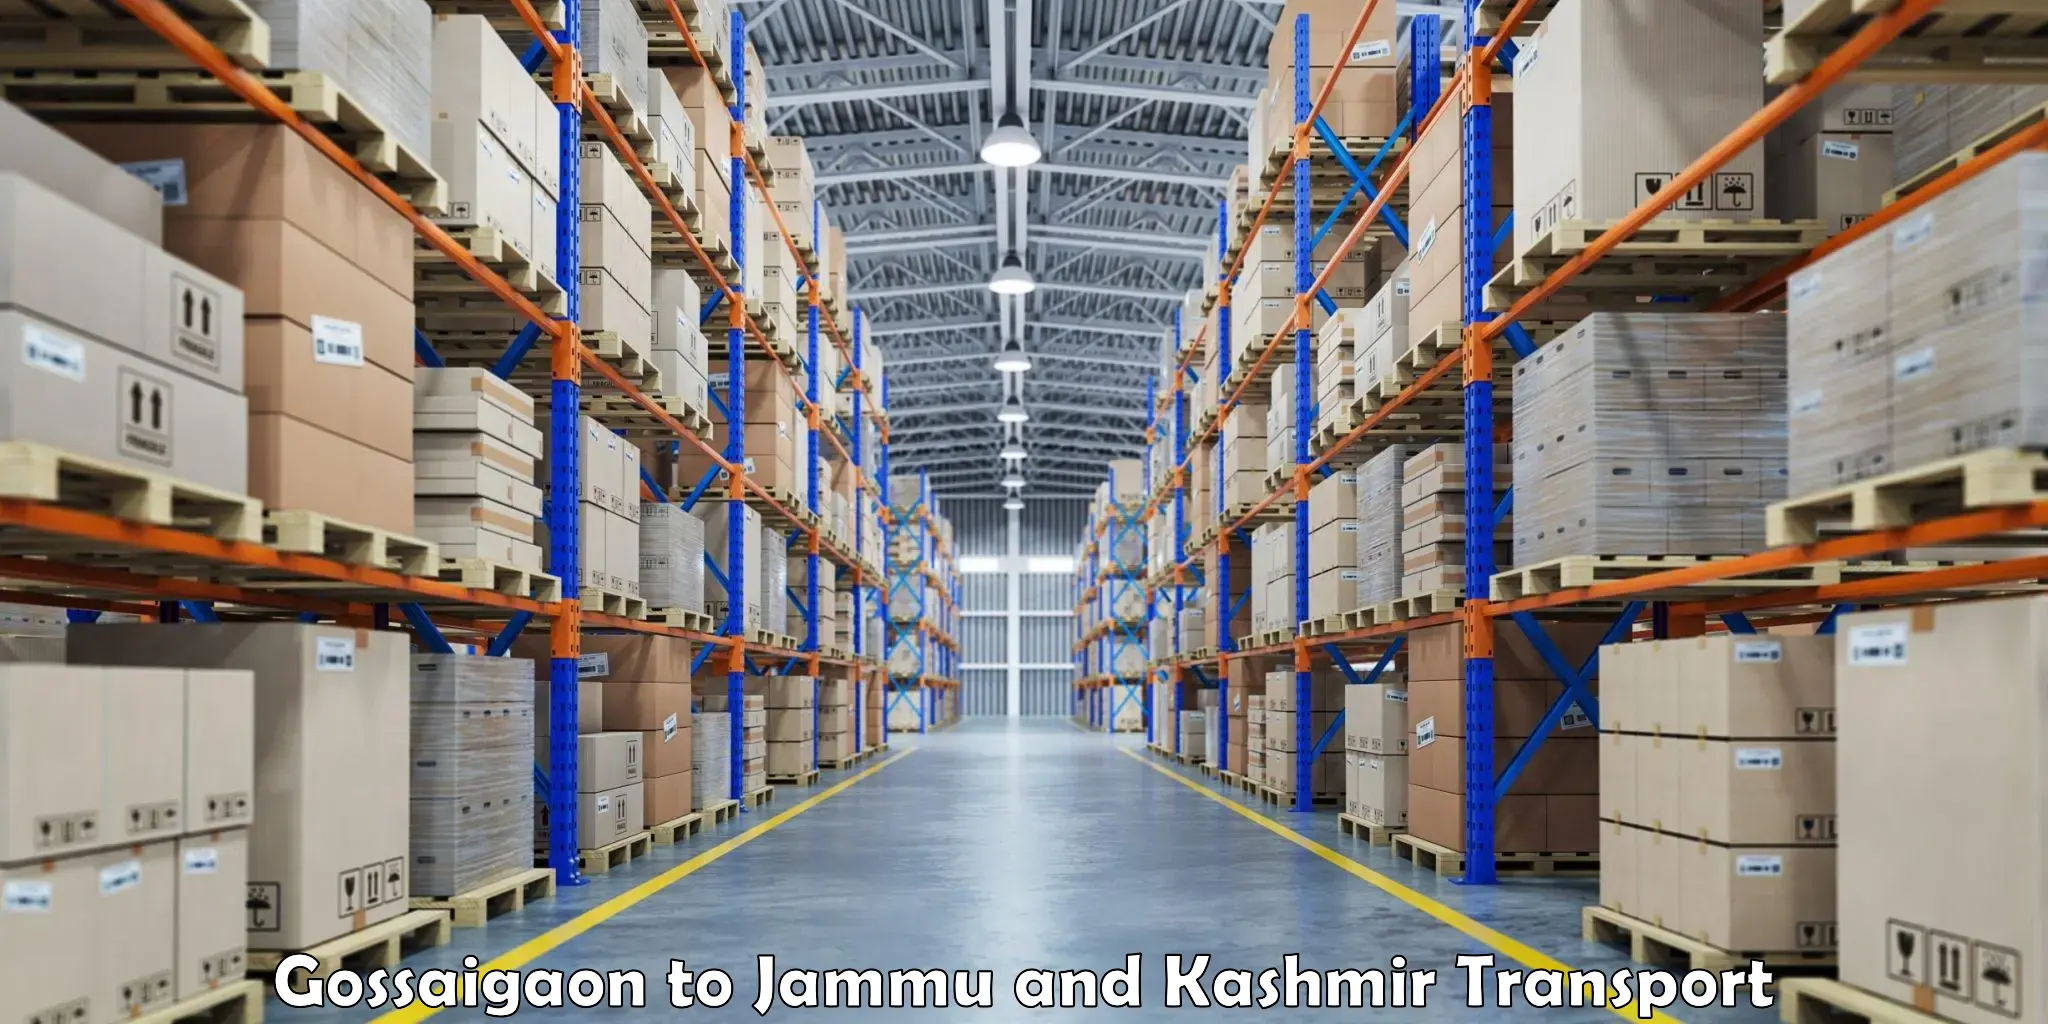 Commercial transport service Gossaigaon to Baramulla